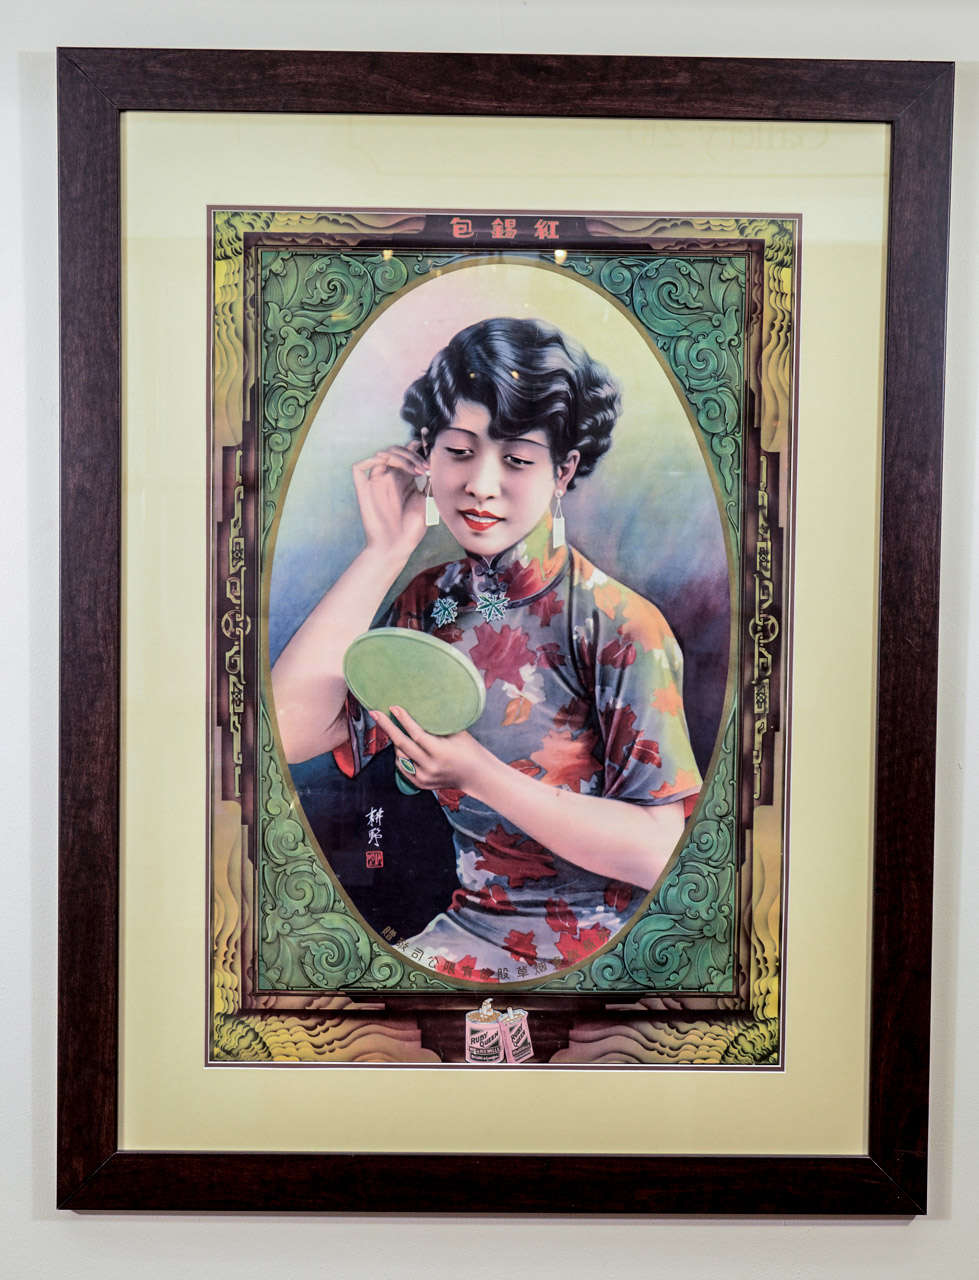 A vintage Chinese advertising poster depicting a young woman trying on earrings.